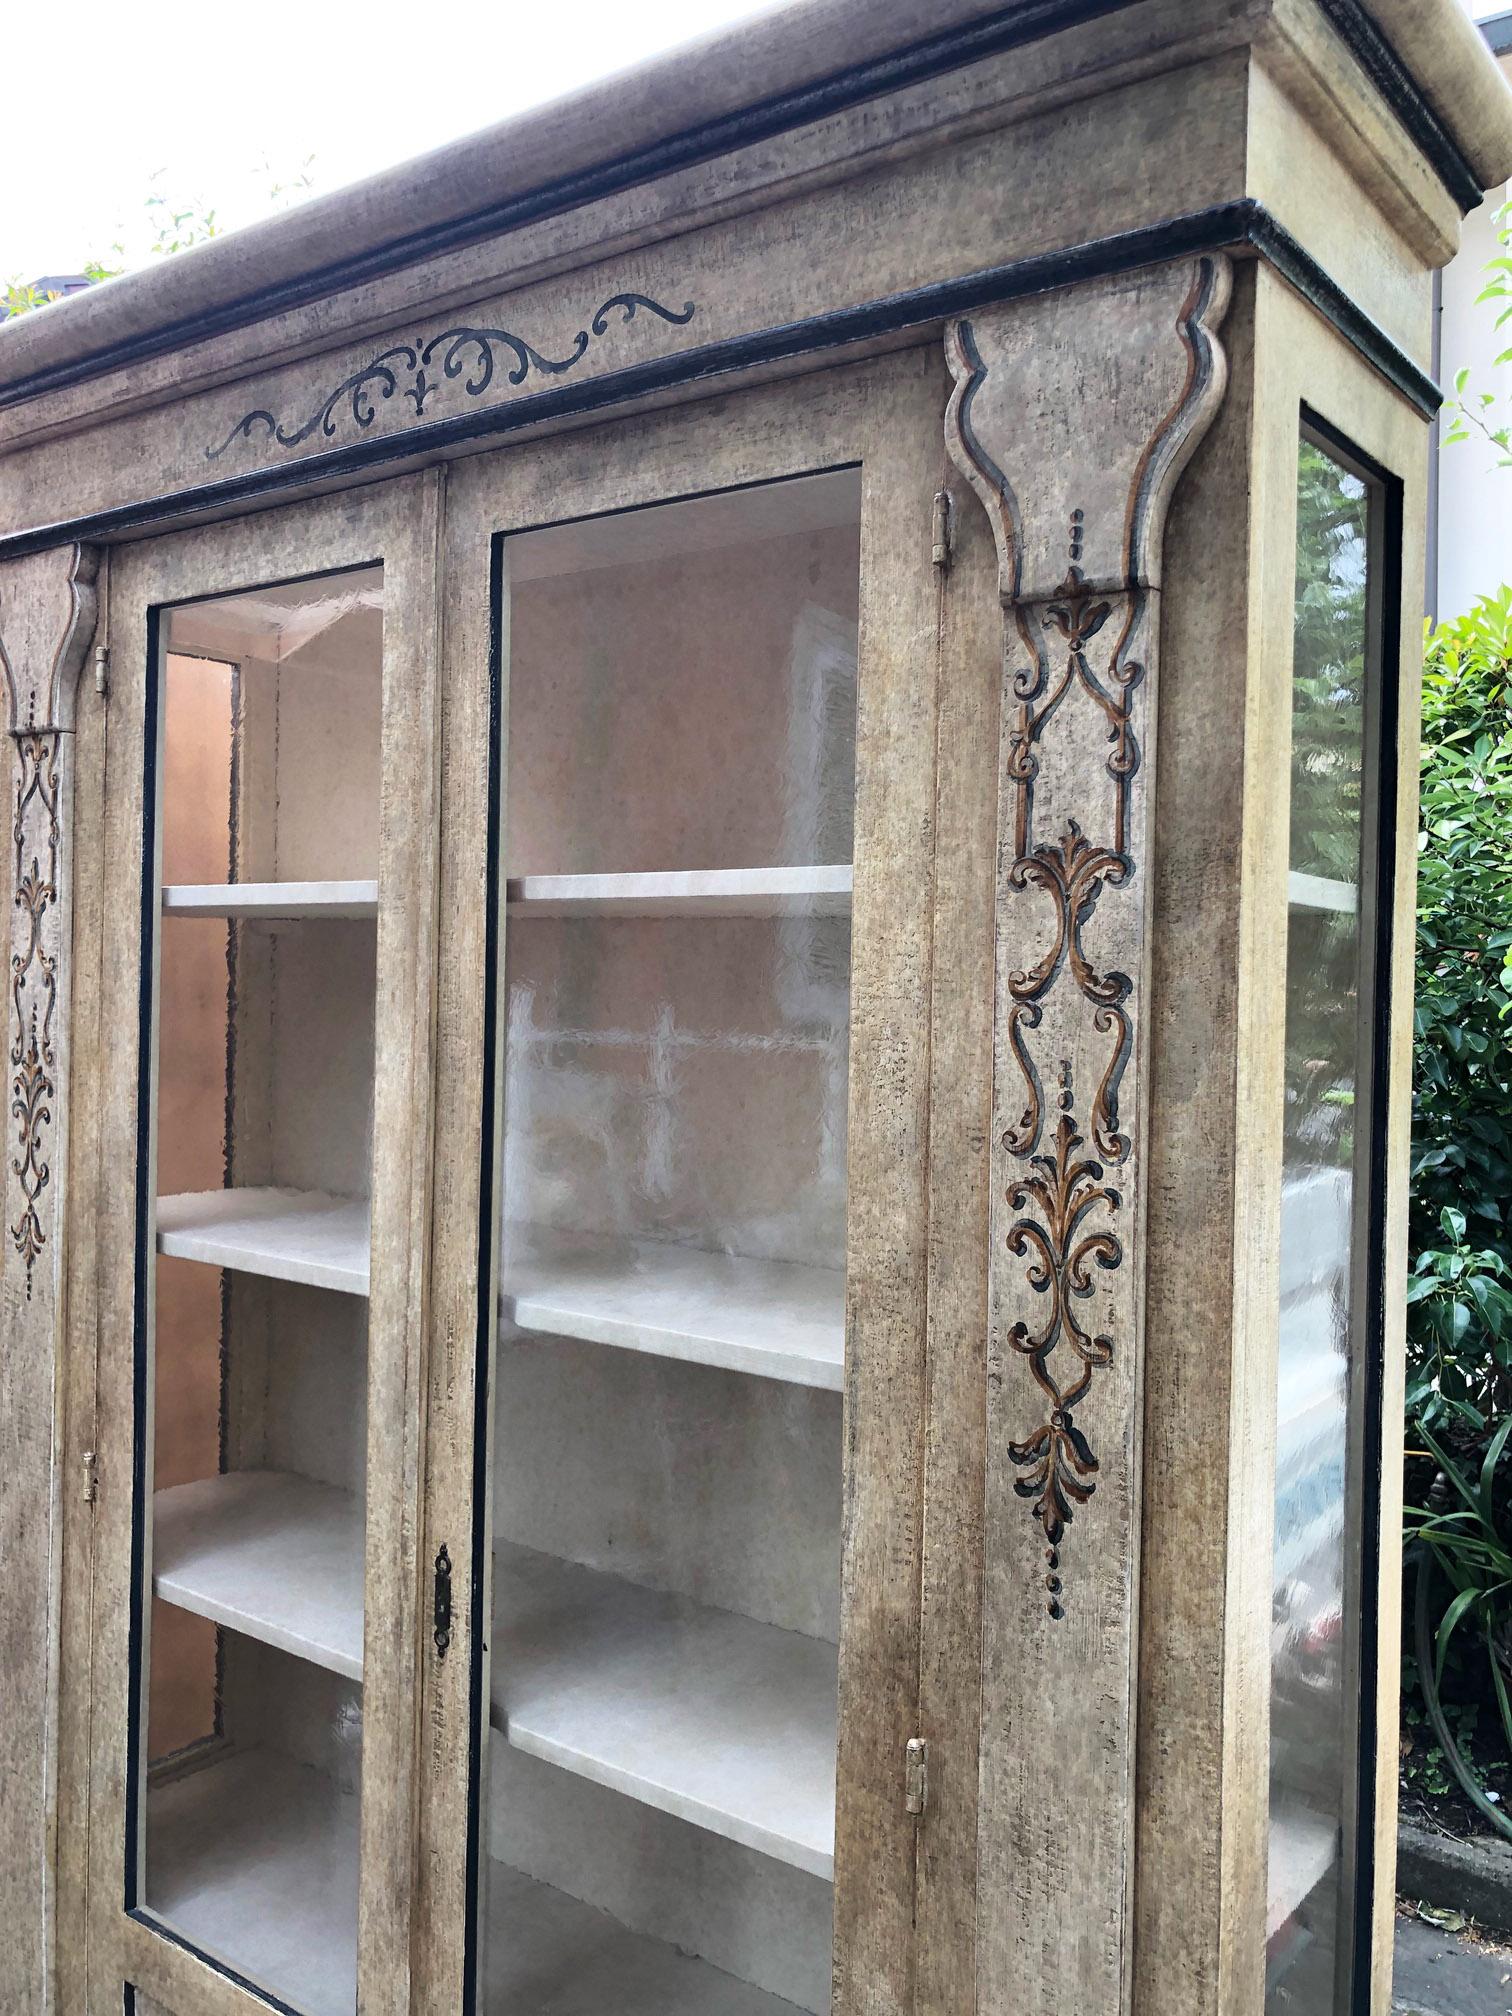 Italian bookcase in fir, with two doors, hand painted, with glass on three sides, internal shelves.
Very sturdy and elegant. 
In my warehouse I have two of these bookcases as seen in the photographs.
They are very similar, precisely because they